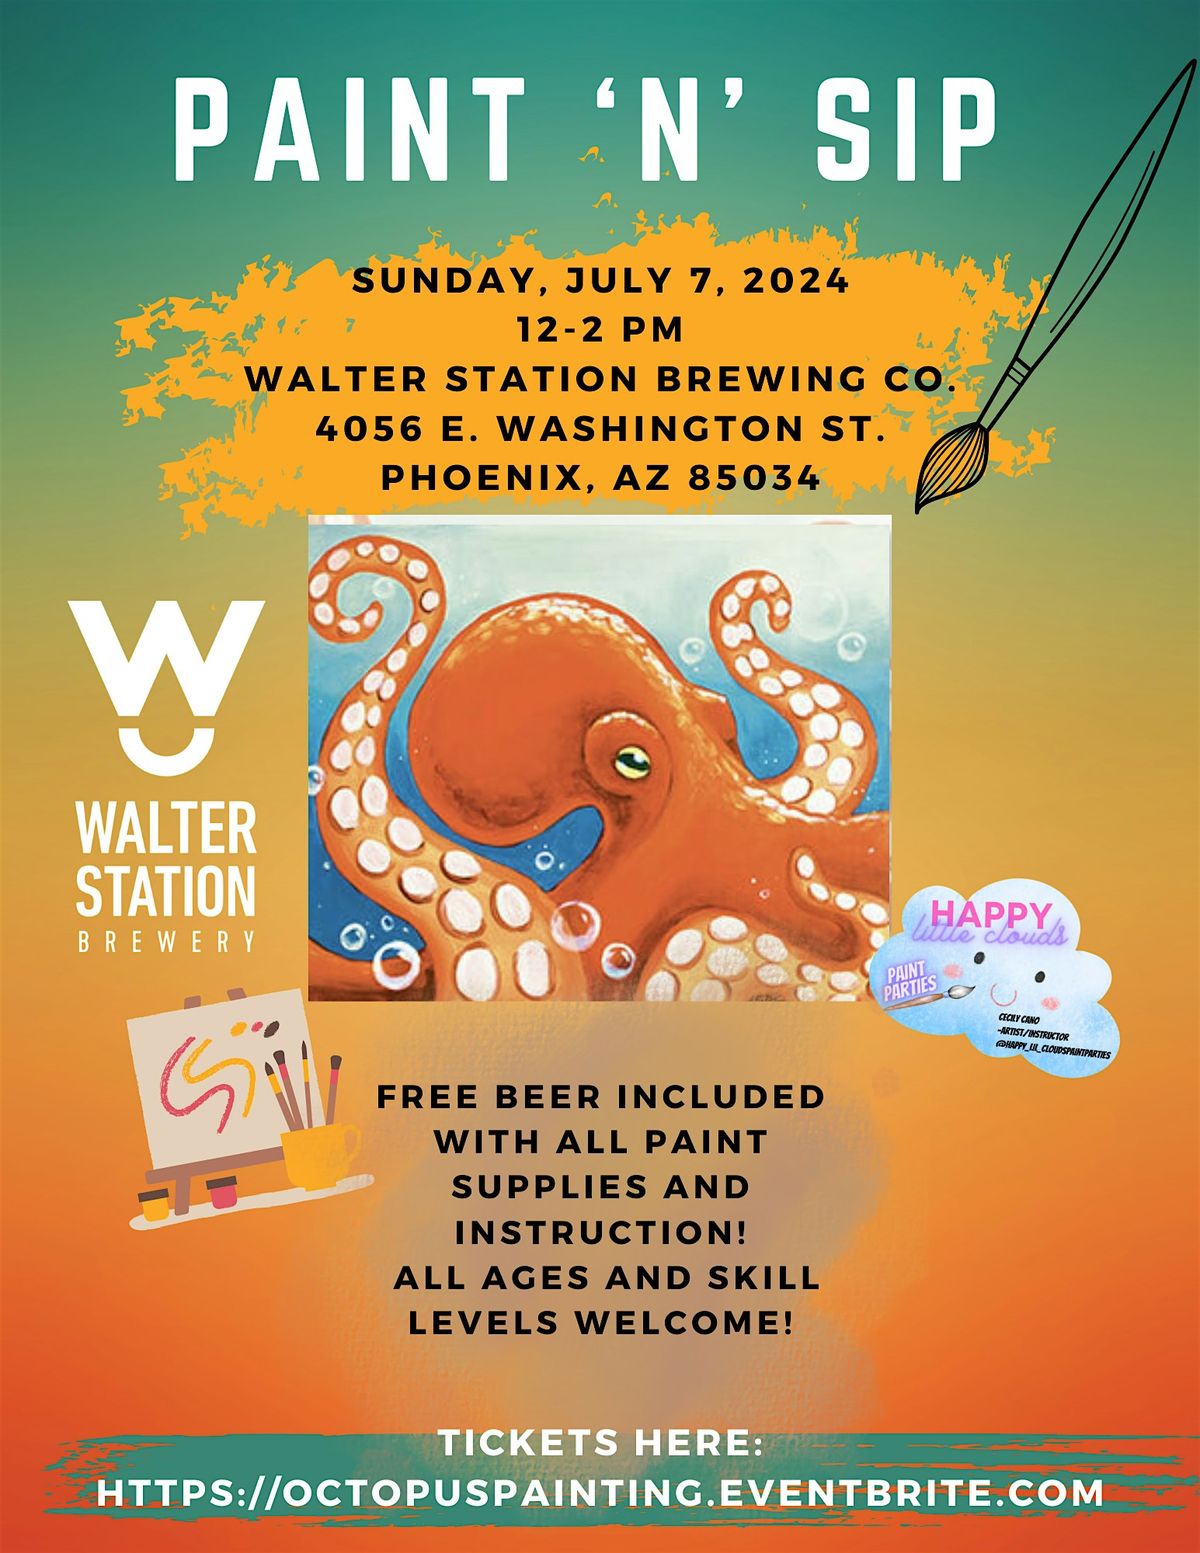 Octopus Paint 'n' Sip at Walter Station Brewing Co.